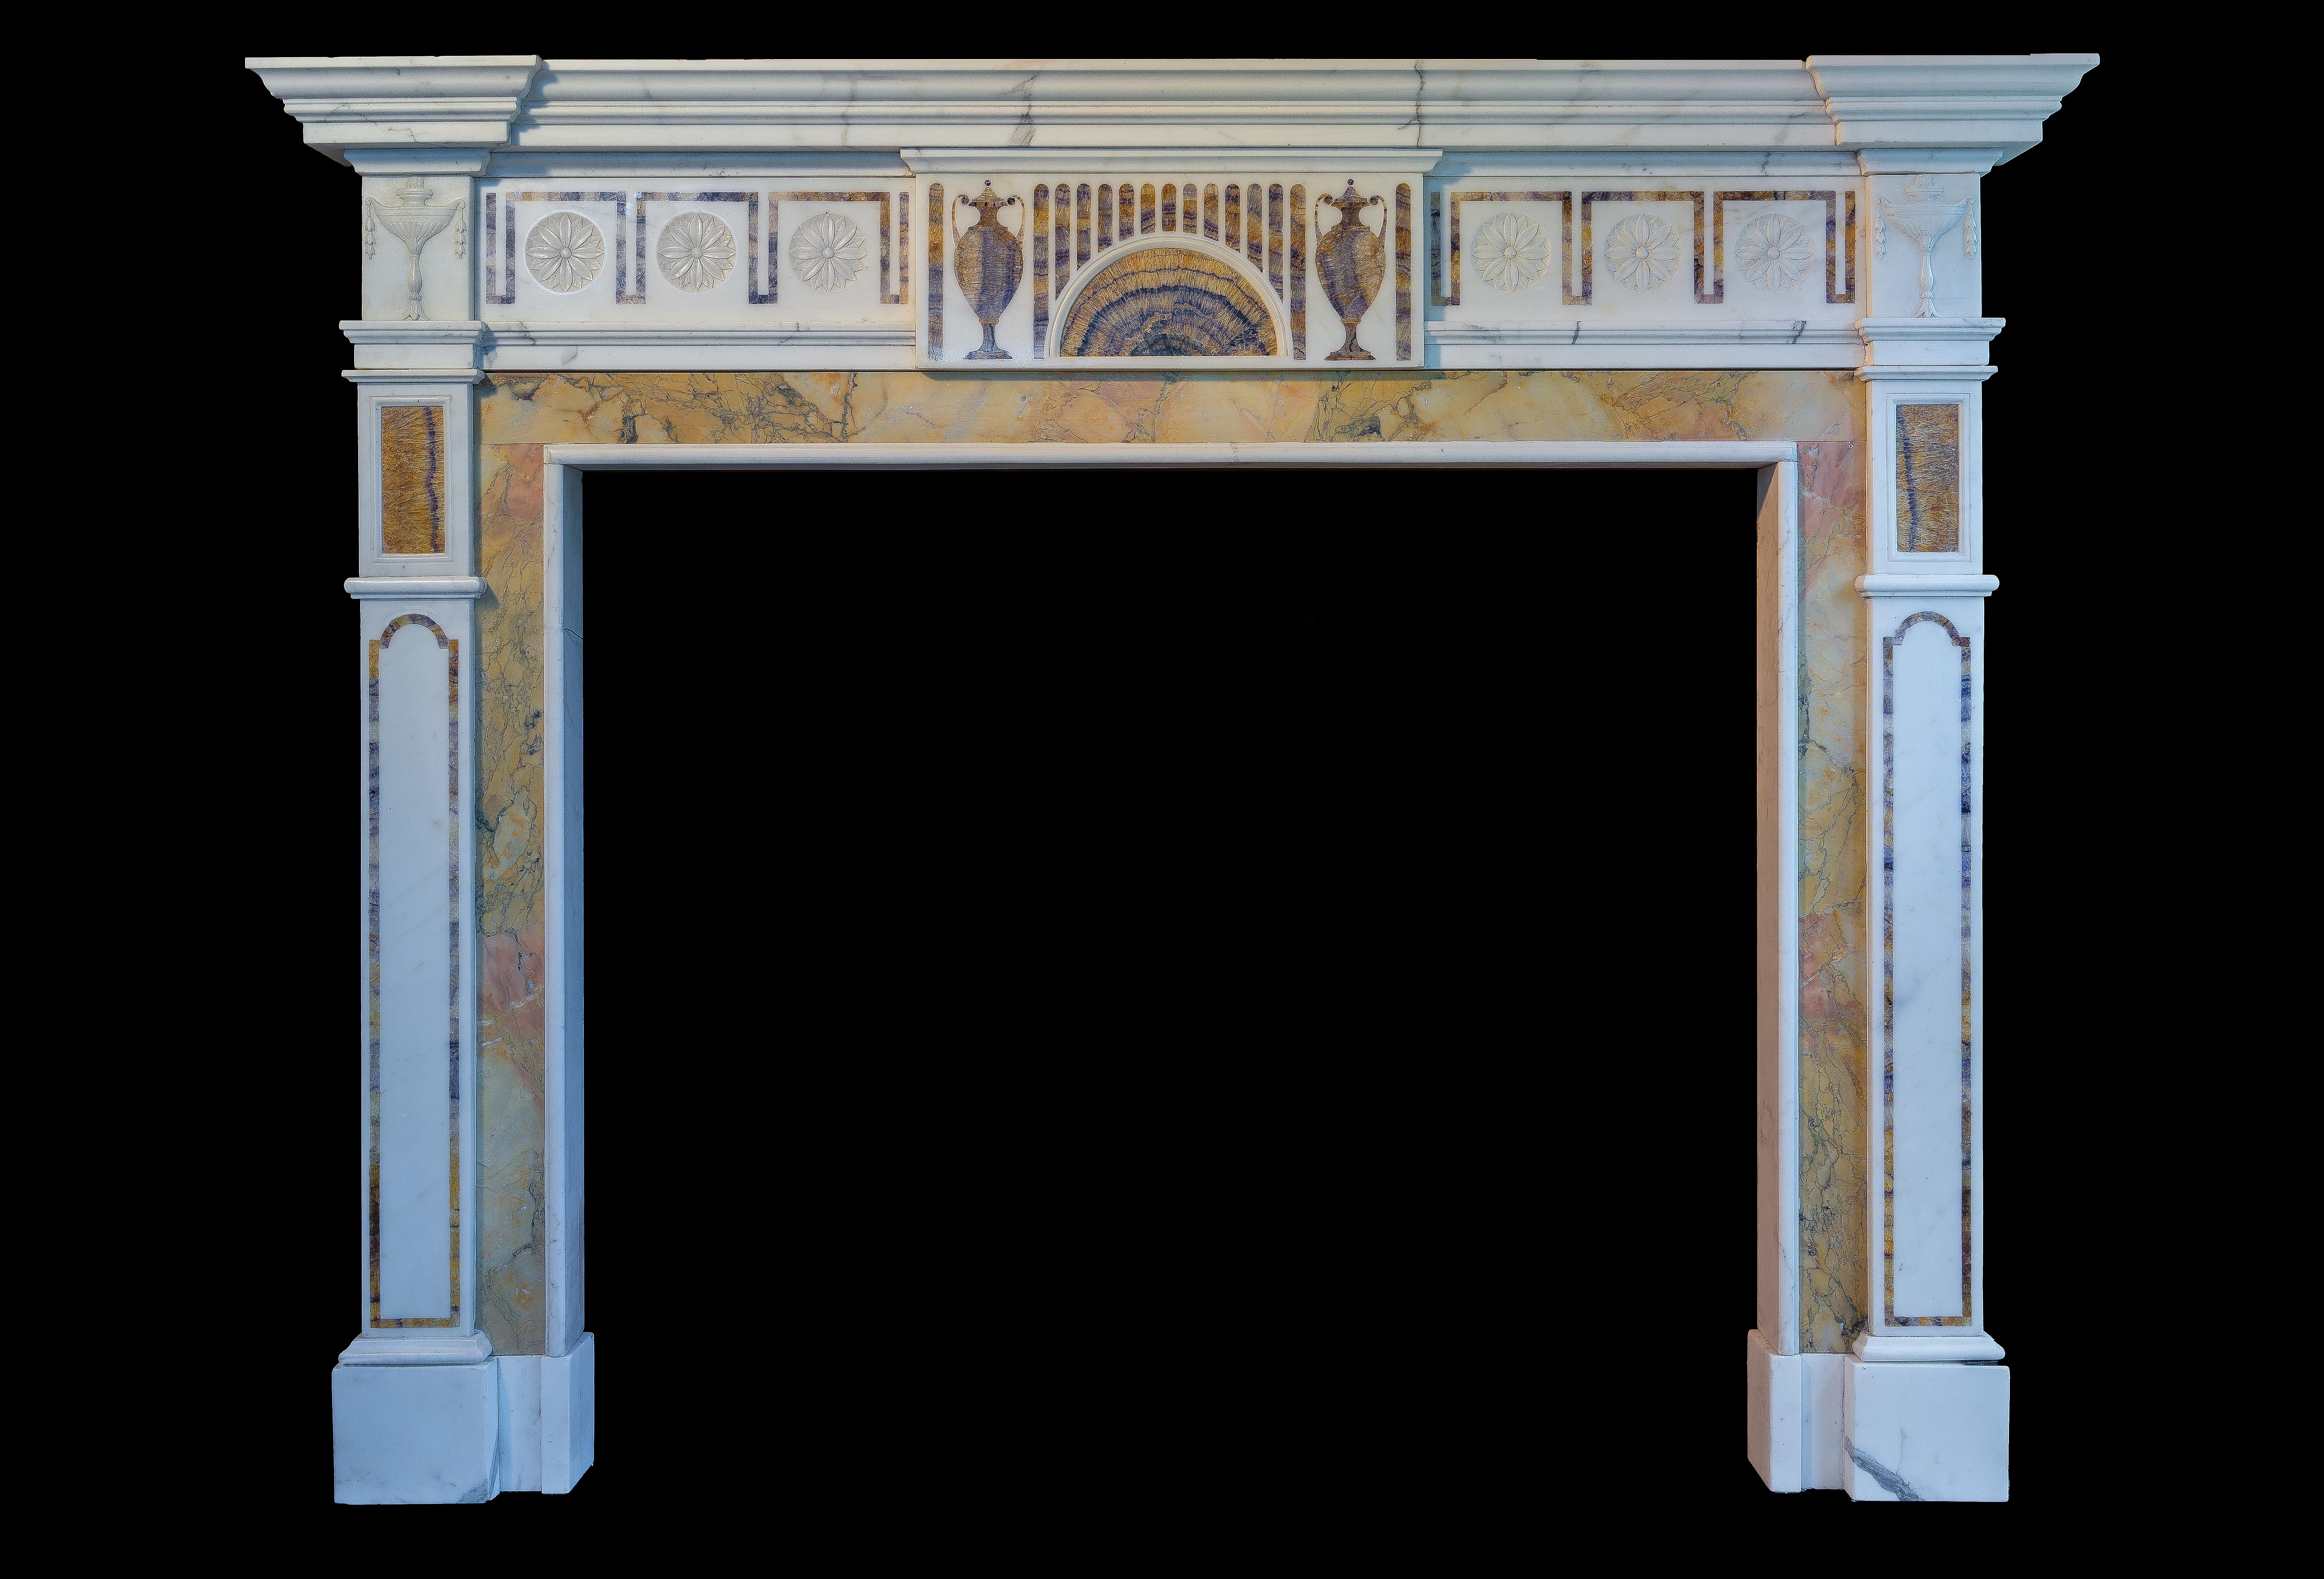 A large and very good quality Georgian style fireplace surround. In Statuary white marble with rare BlueJohn marble tablet and inlay. The jambs with Bluejohn inlay and Siena marble ingrounds, surmounted by classical carved urn corner blocks. 
The